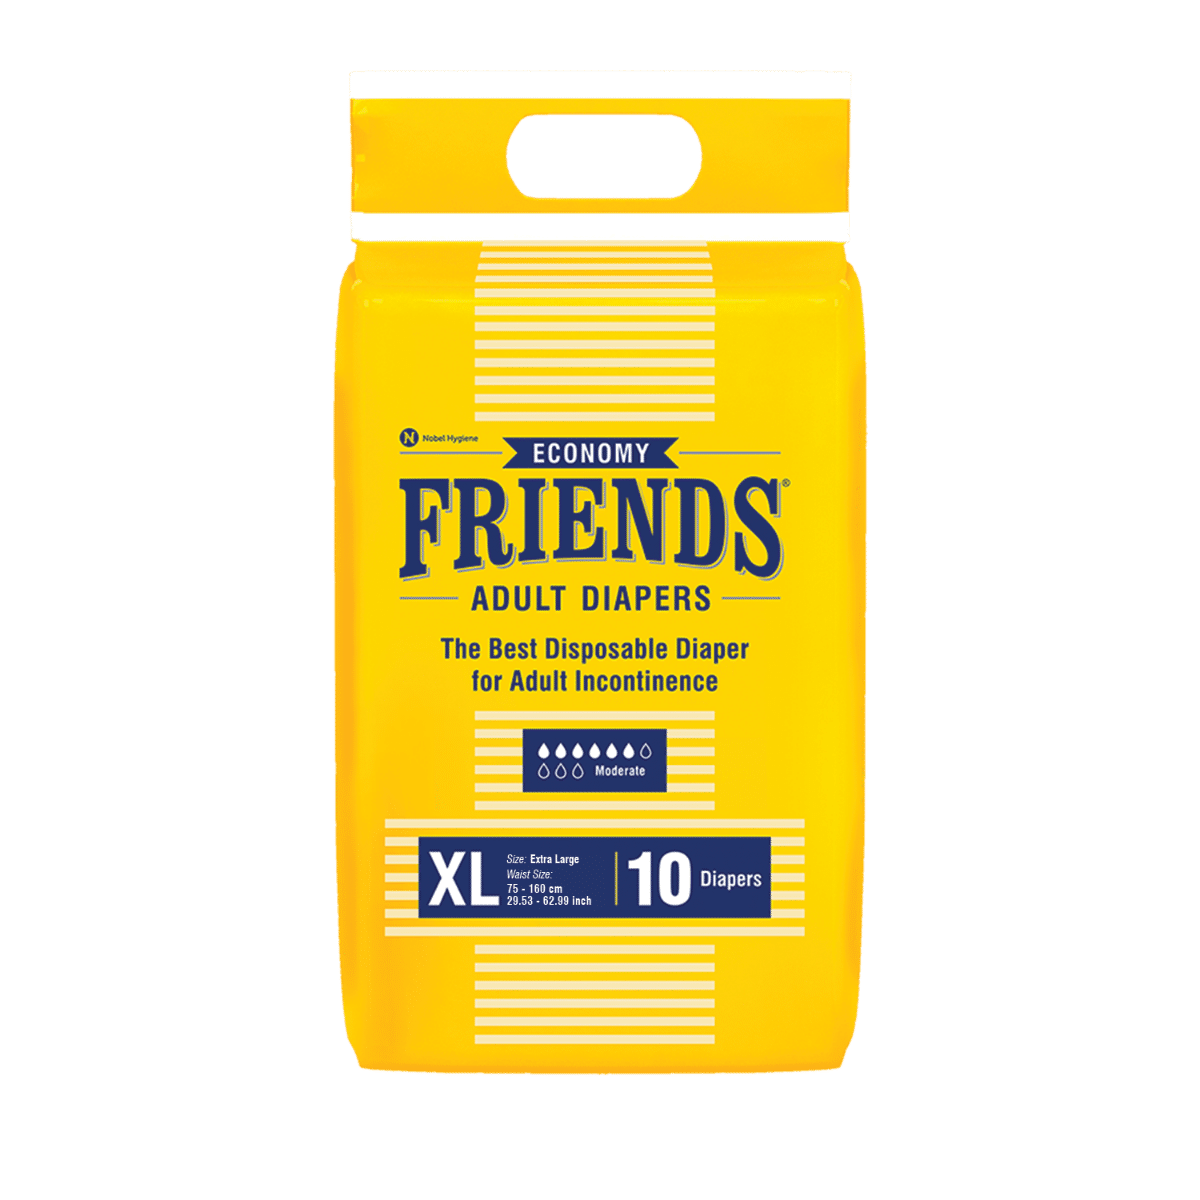 Friends Economy Adult Diapers XL, 10 Count, Pack of 1 